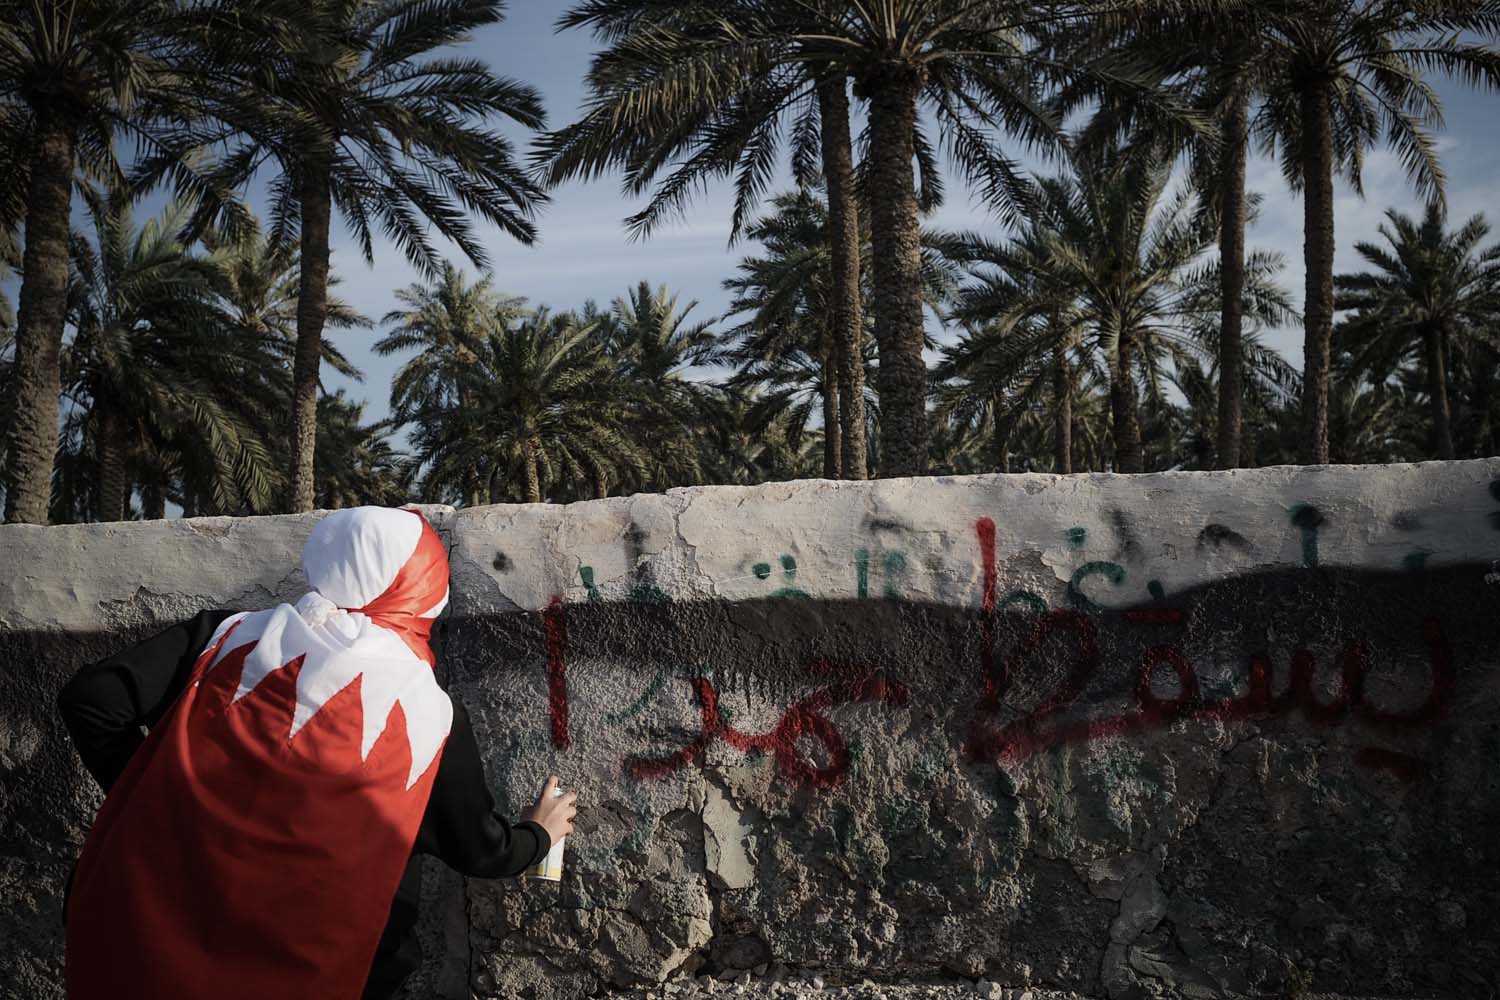 March 22, 2013. A Bahraini woman writes a graffiti reading in Arabic  Down with Hamad during an anti-government rally in solidarity with jailed human rights activist, Nabeel Rajab in the village of Belad Al Qadeem, in a suburb of Manama. The International Federation for Human Rights says around 80 people have been killed in Bahrain since violence first broke out on February 14, 2011 when thousands of protesters camped out in Manama's Pearl Square, taking their cue from the Arab Spring uprisings.